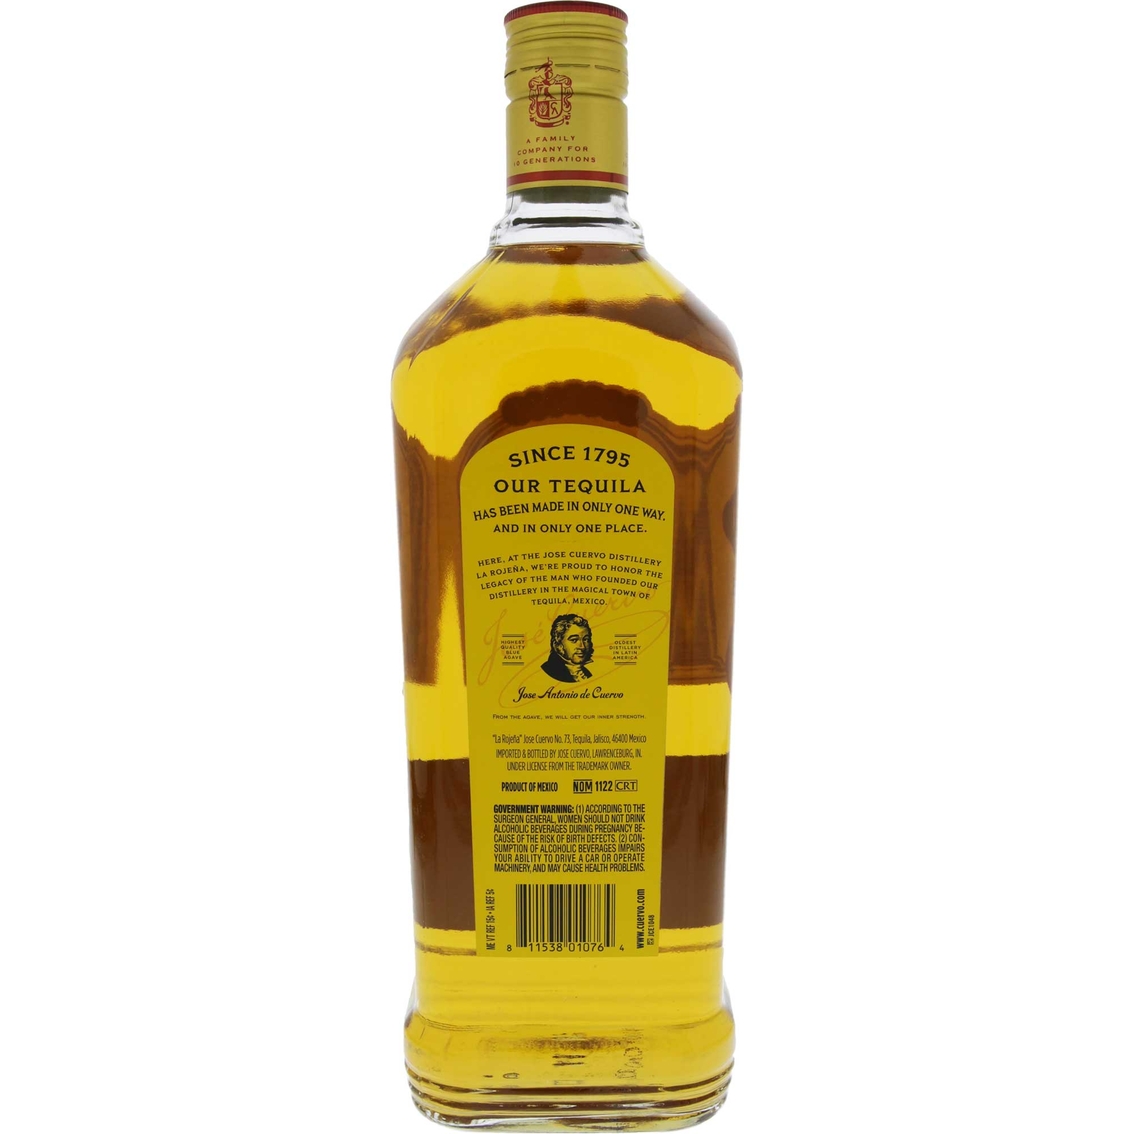 Jose Cuervo Gold Tequila 1.75L - Image 2 of 3